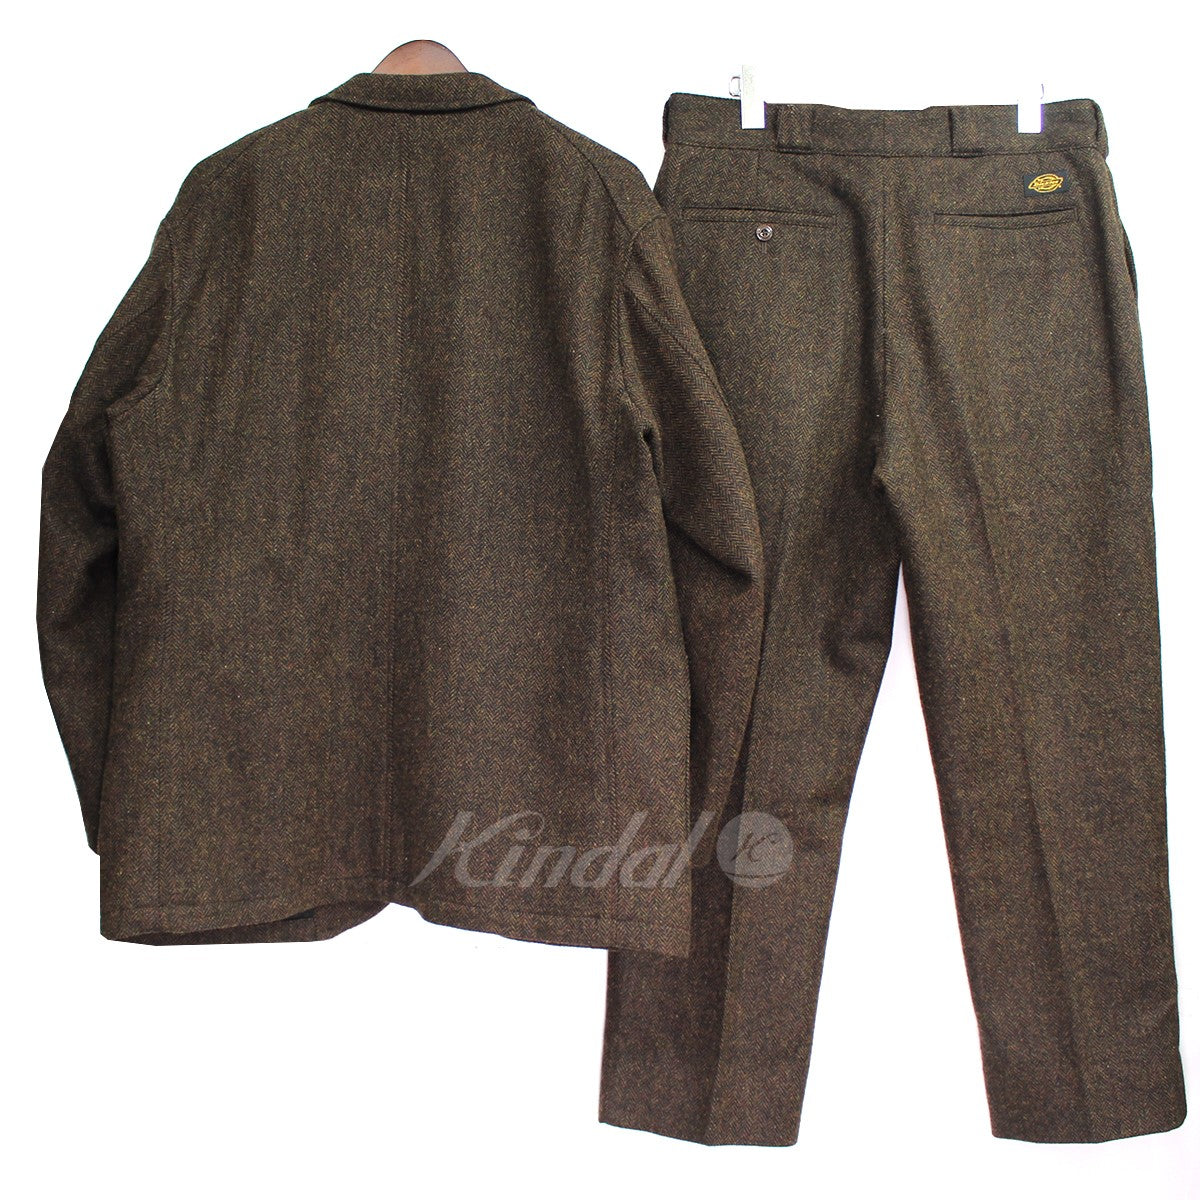 TRIPSTER×Dickies×BEAMS 19AW ツイードセットアップ スーツ 194M10BM01 